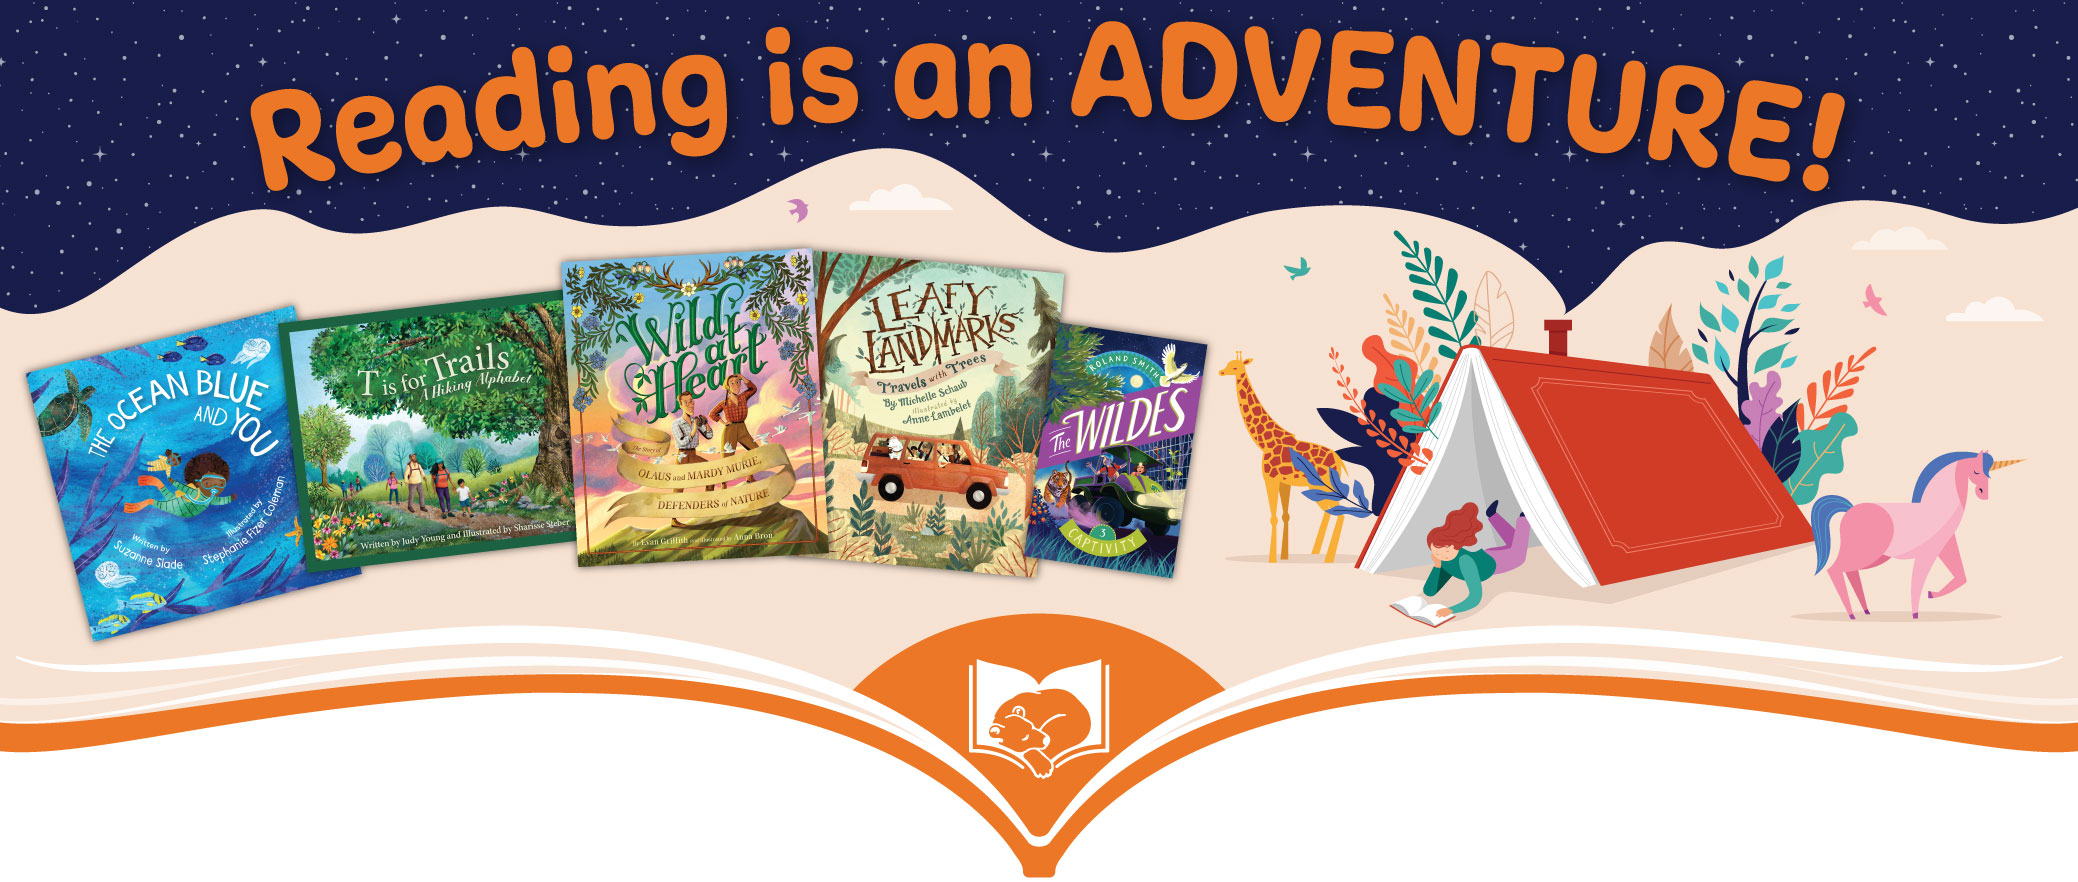 Sleeping Bear Press: Bringing meaningful stories to young readers